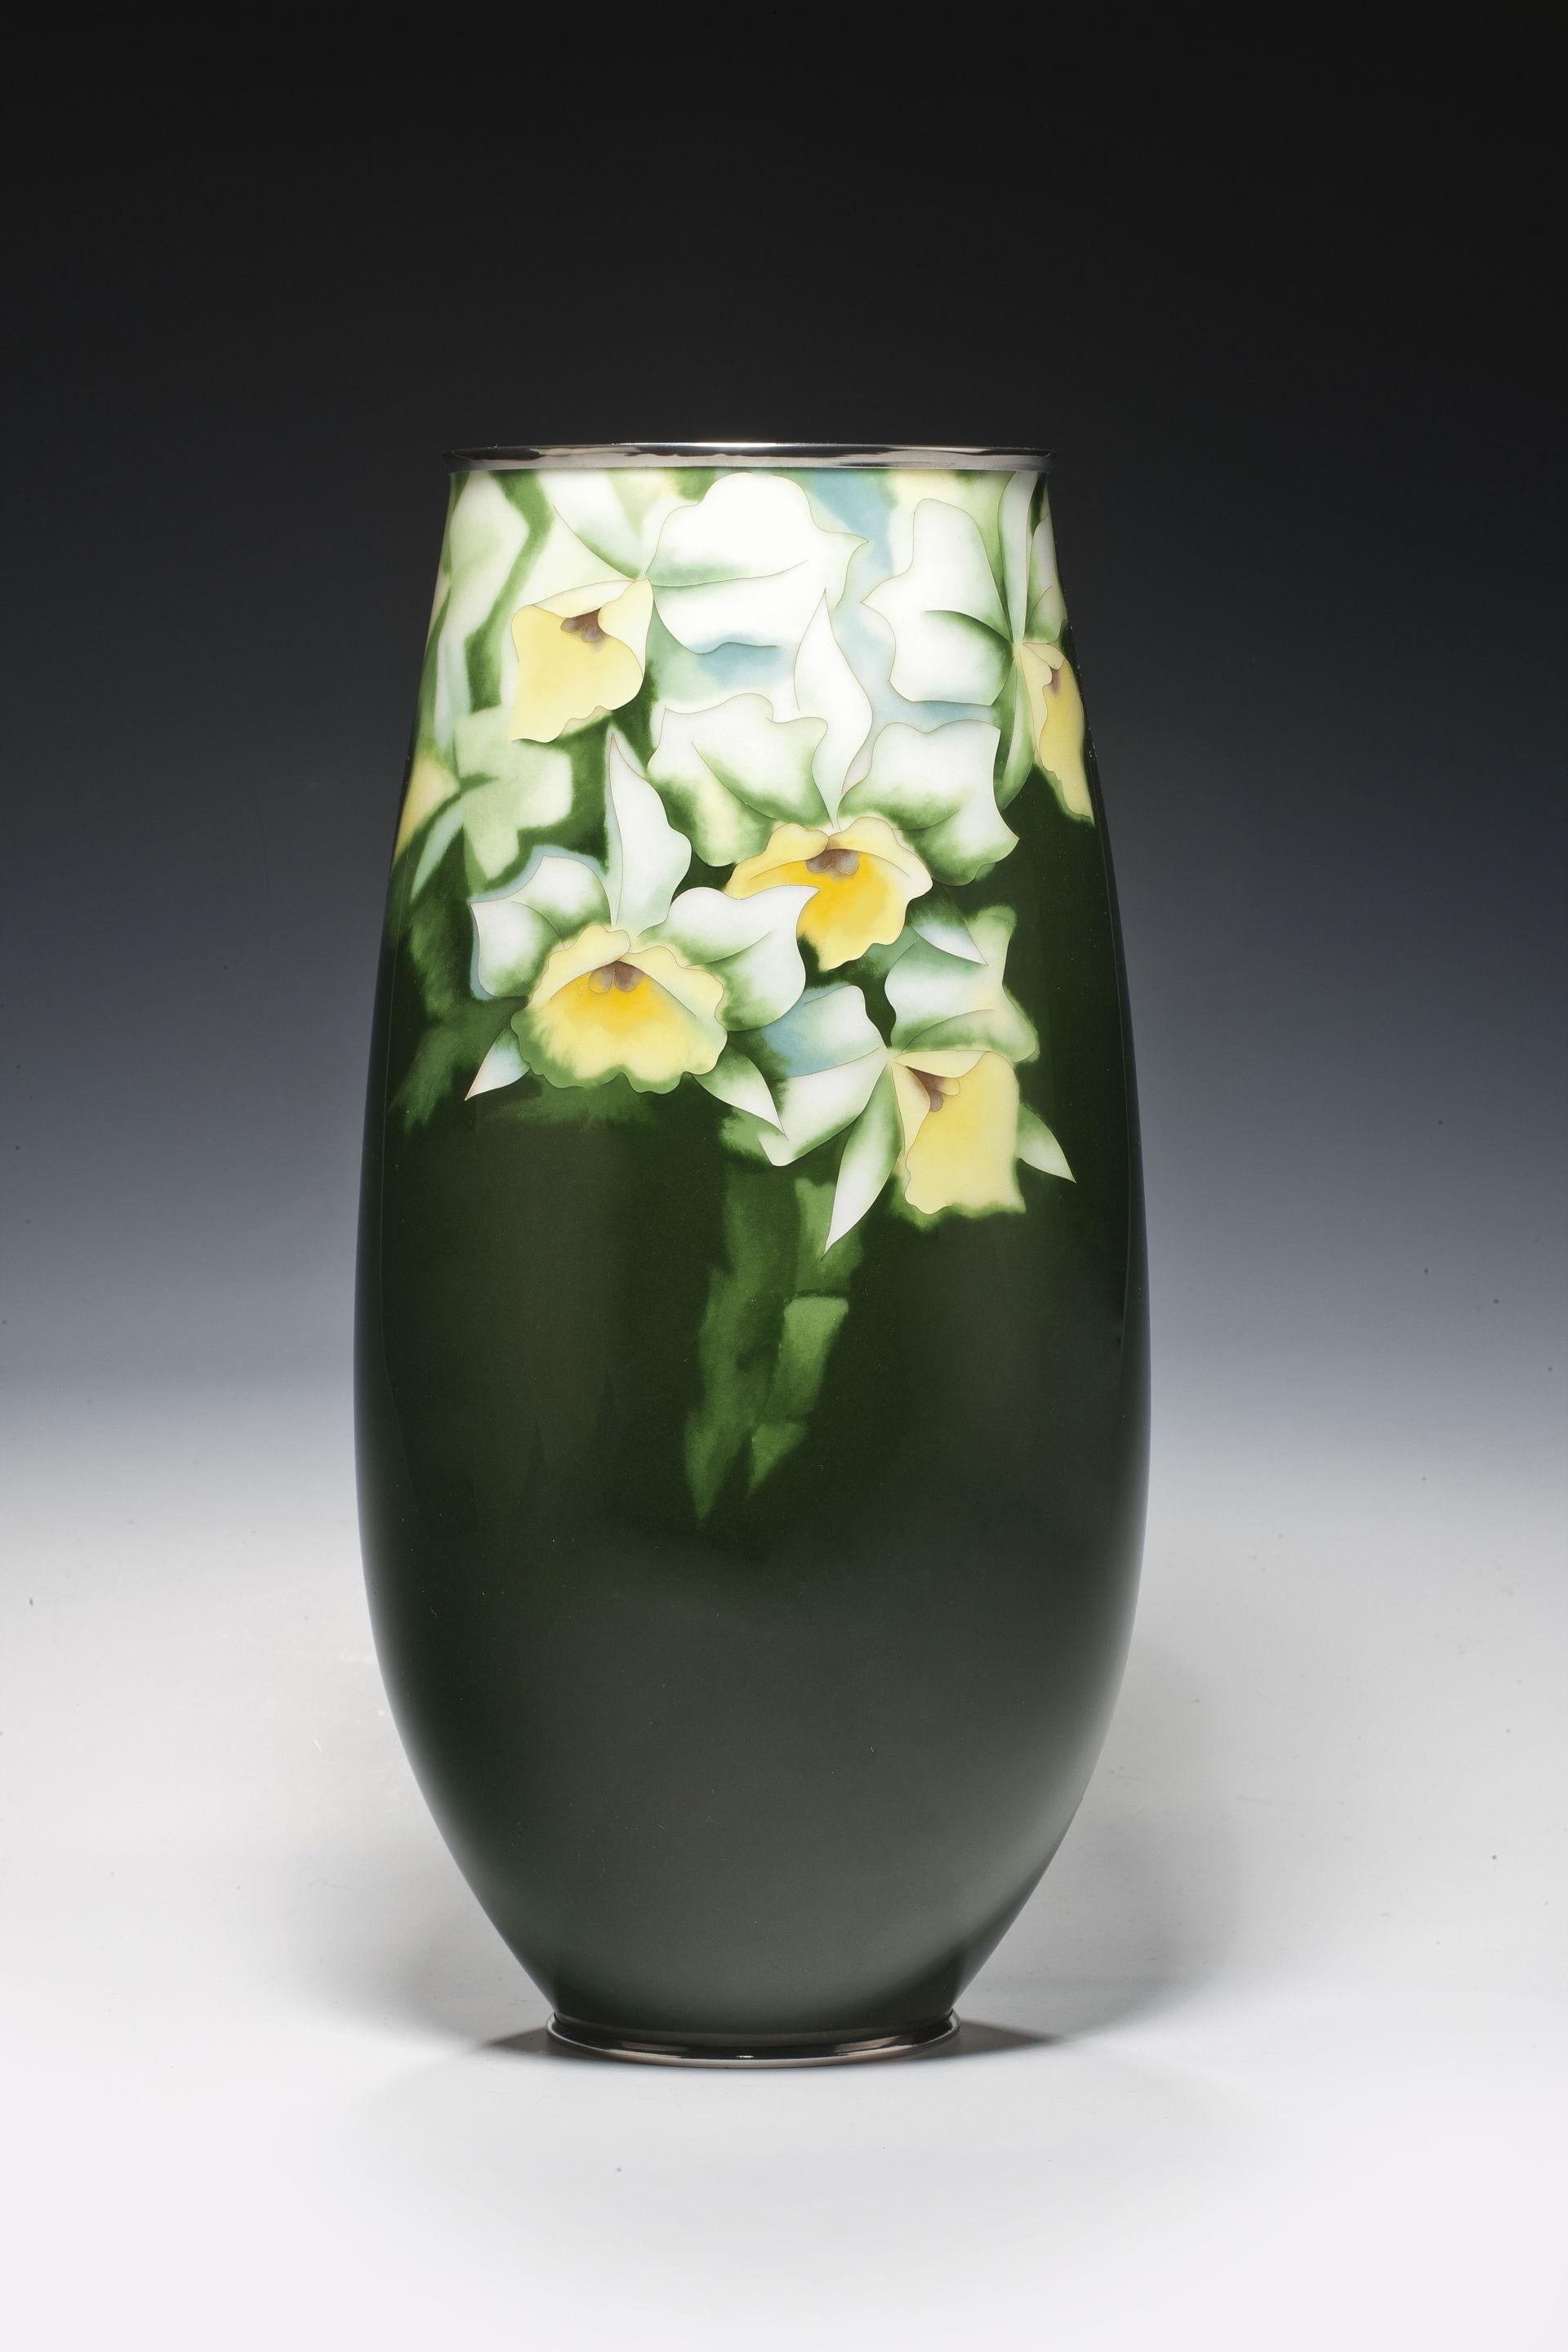 This dark green vase has yellow and white narcissi in yusen and musen enamels.

Literature: See Gregory Irvine, Japanese Cloisonne, V&A, 2006, page 97 for a similar example in the Victoria and Albert Collection.

Signed/Inscribed: Ando mark.